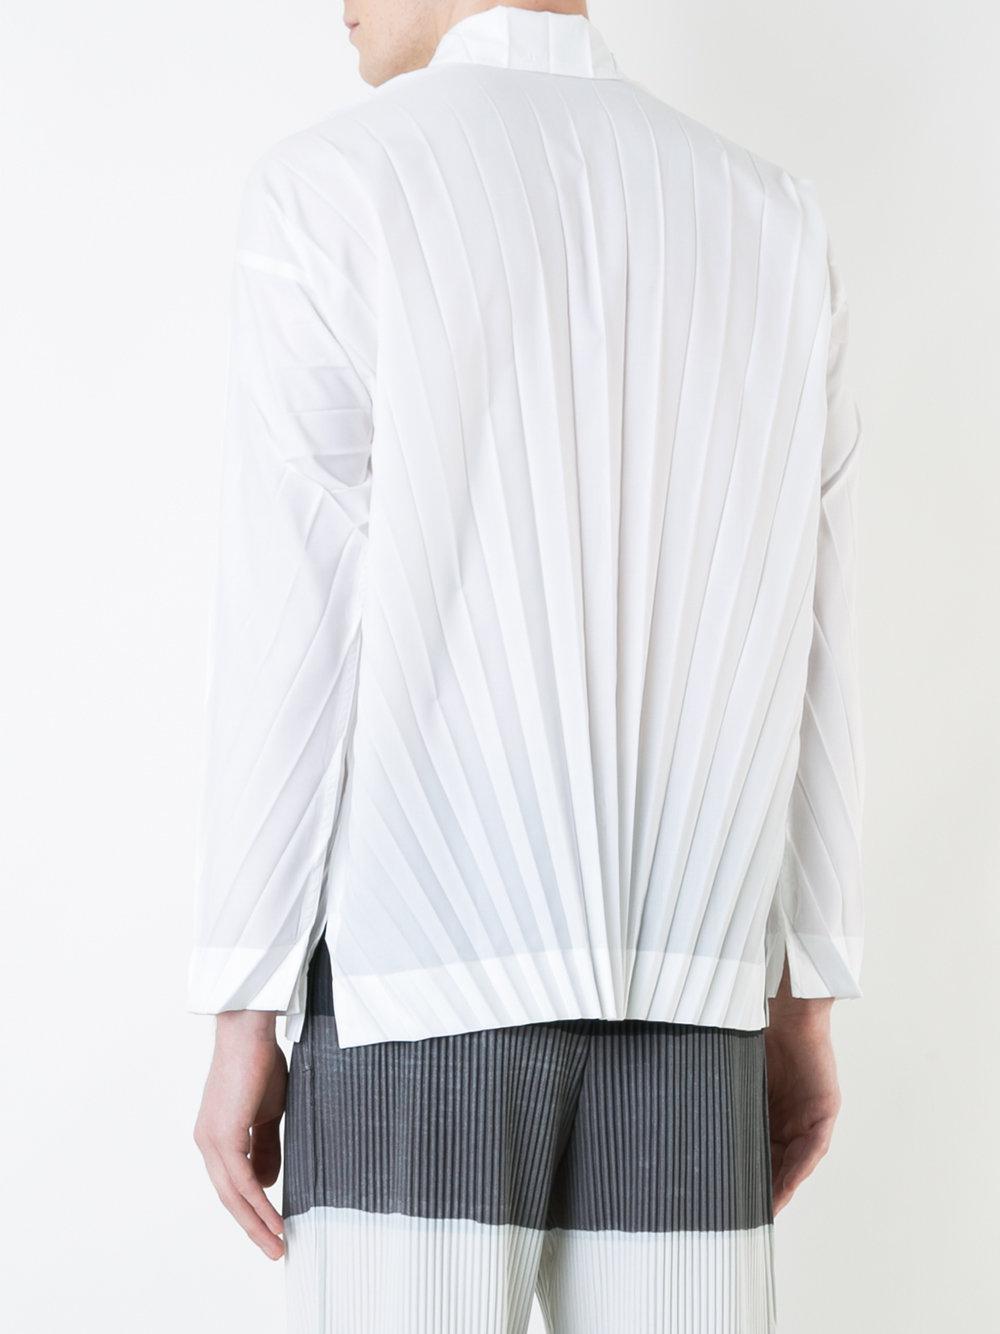 Lyst - Homme Plissé Issey Miyake Pleated Shirt in White for Men